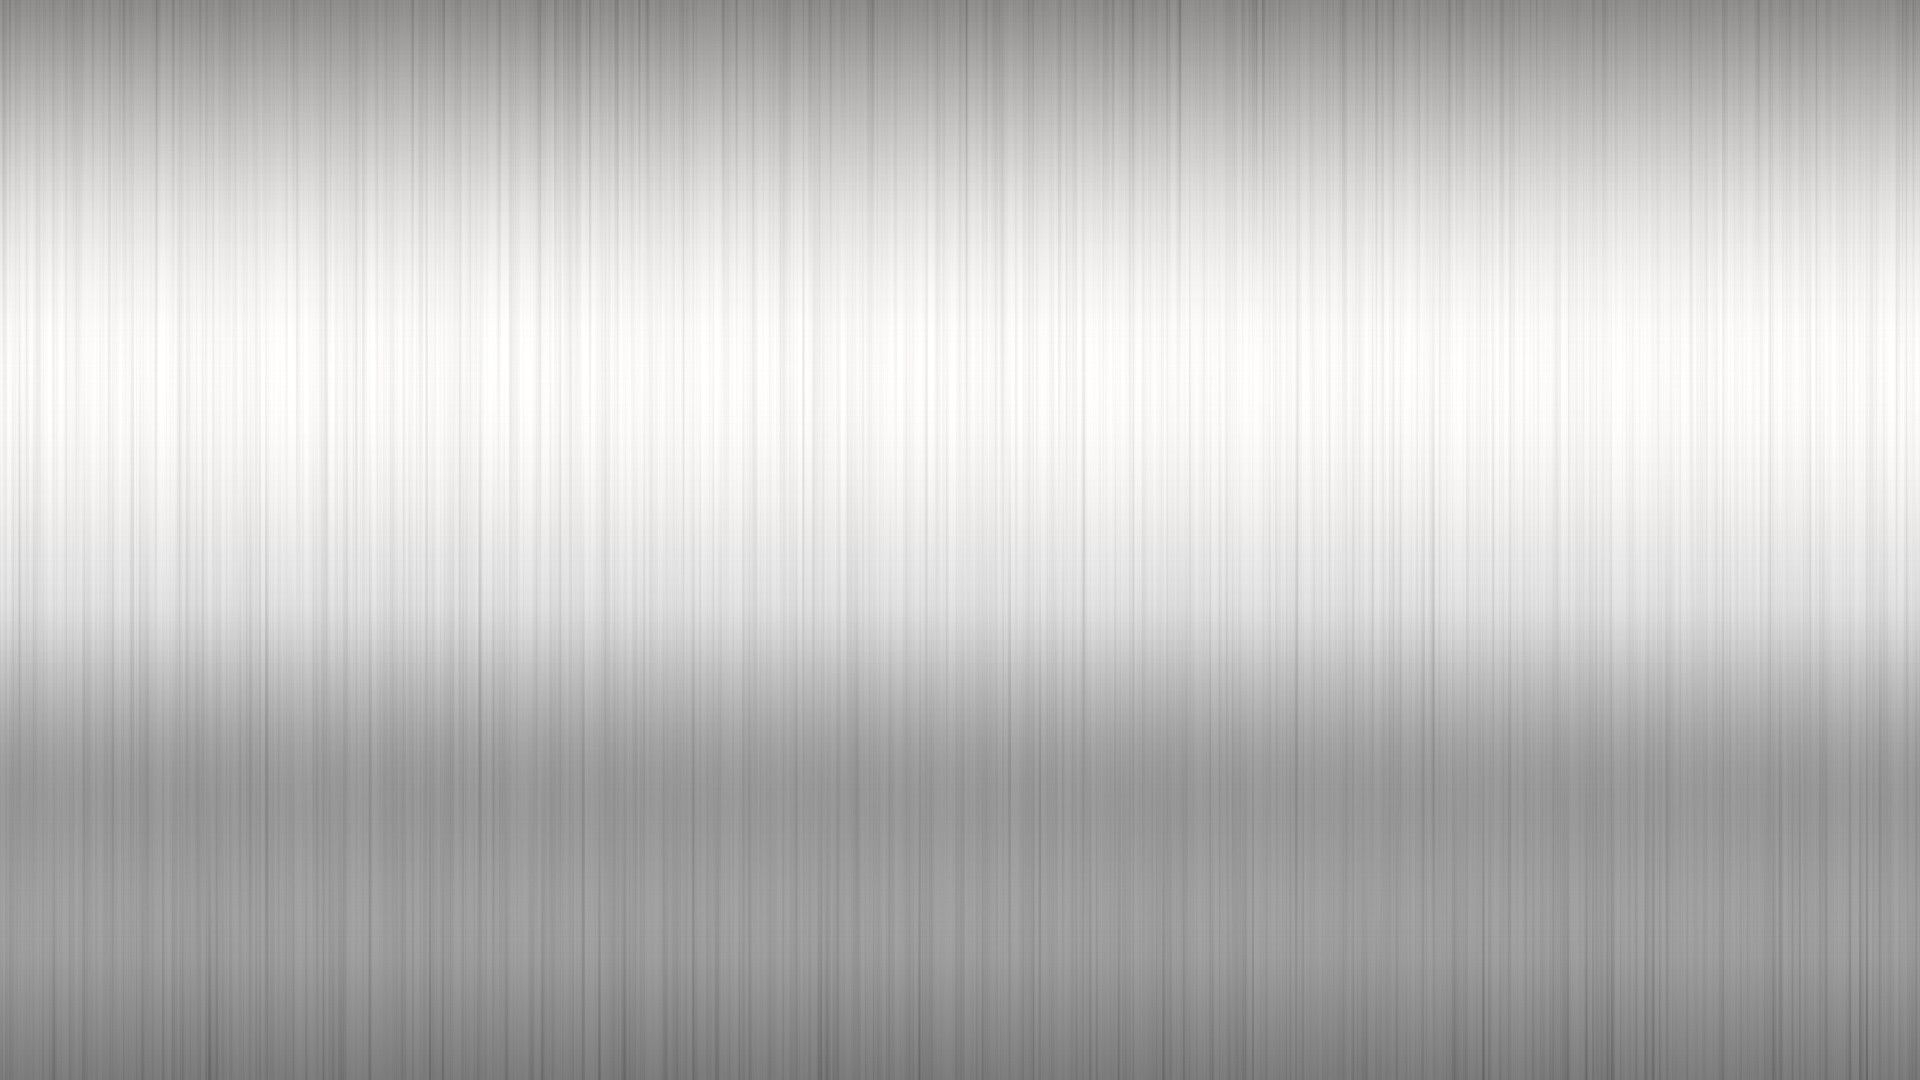 1920x1080 Res: , Shiny Brushed Stainless Steel Metal Textures Texturex Chrome Texture Seamless | Stainless steel texture, Metal texture, Texture